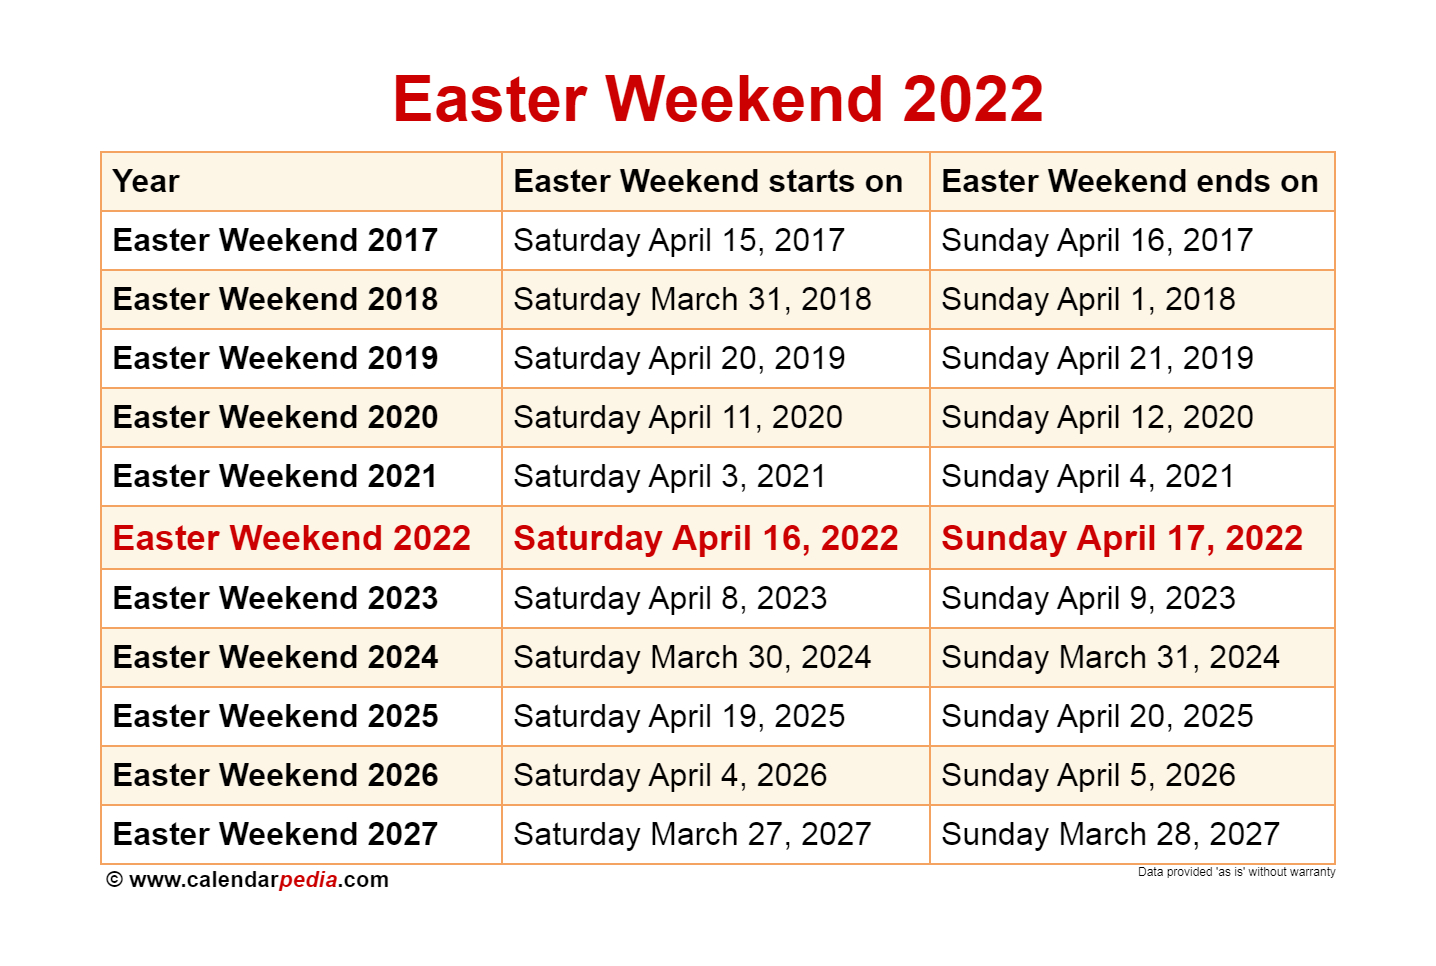 When Is Easter Weekend 2022?